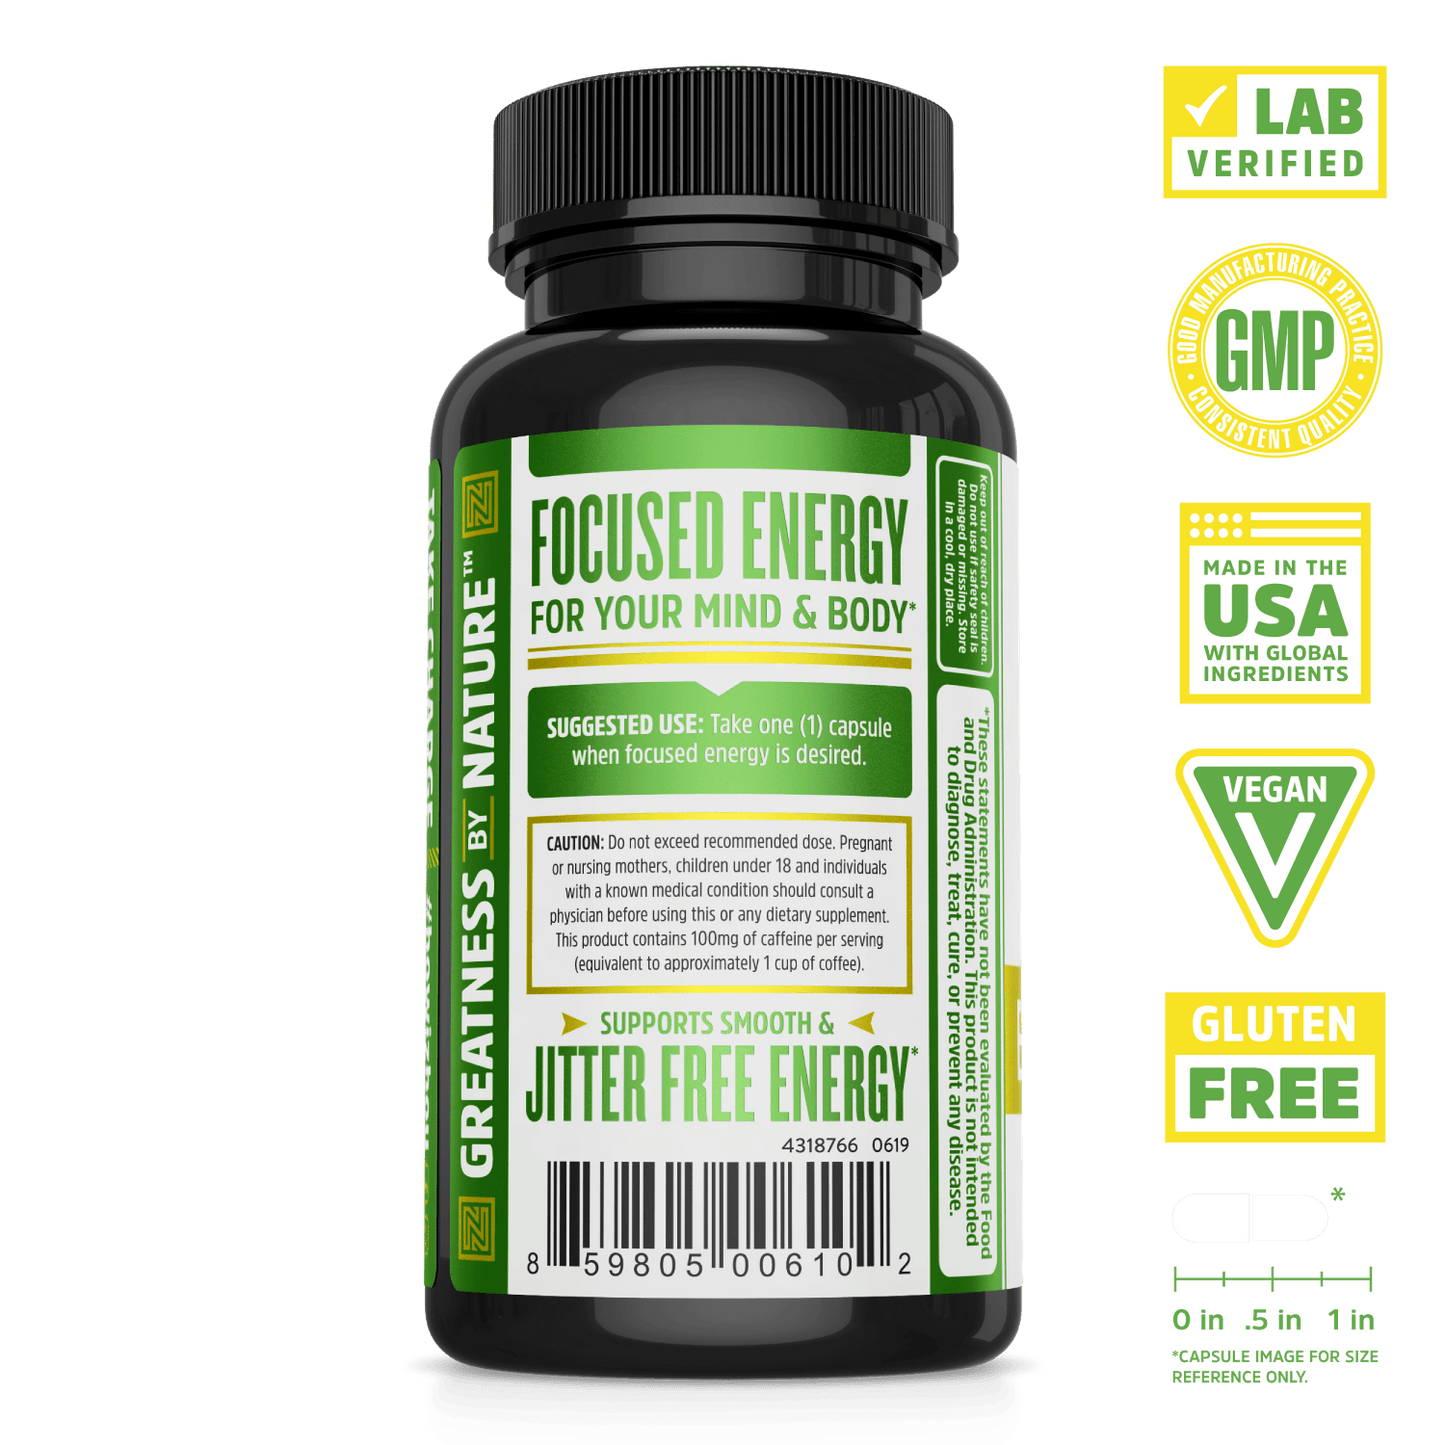 Zhou Nutrition Energy + Focus Long Lasting Energy Supplement. Bottle side. Lab verified, good manufacturing practices, made in the USA with global ingredients, vegan, gluten free.